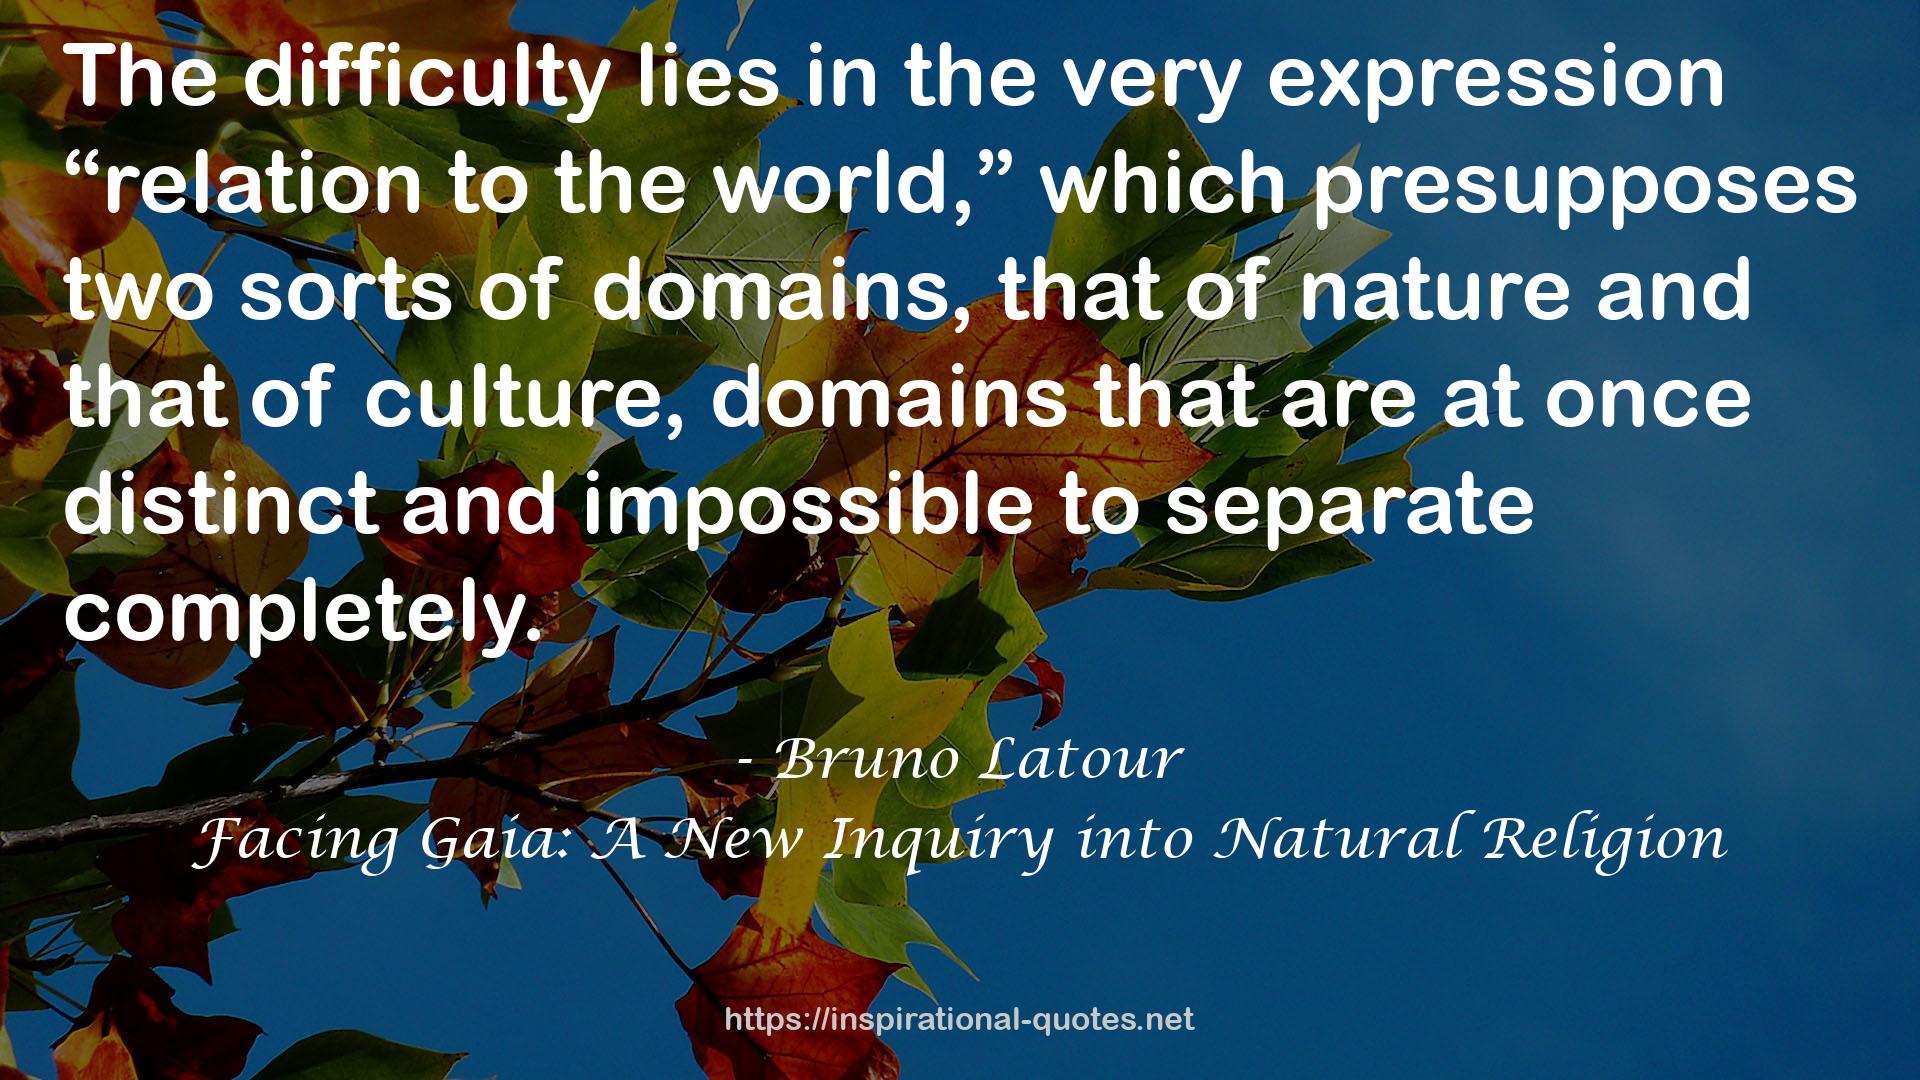 Facing Gaia: A New Inquiry into Natural Religion QUOTES